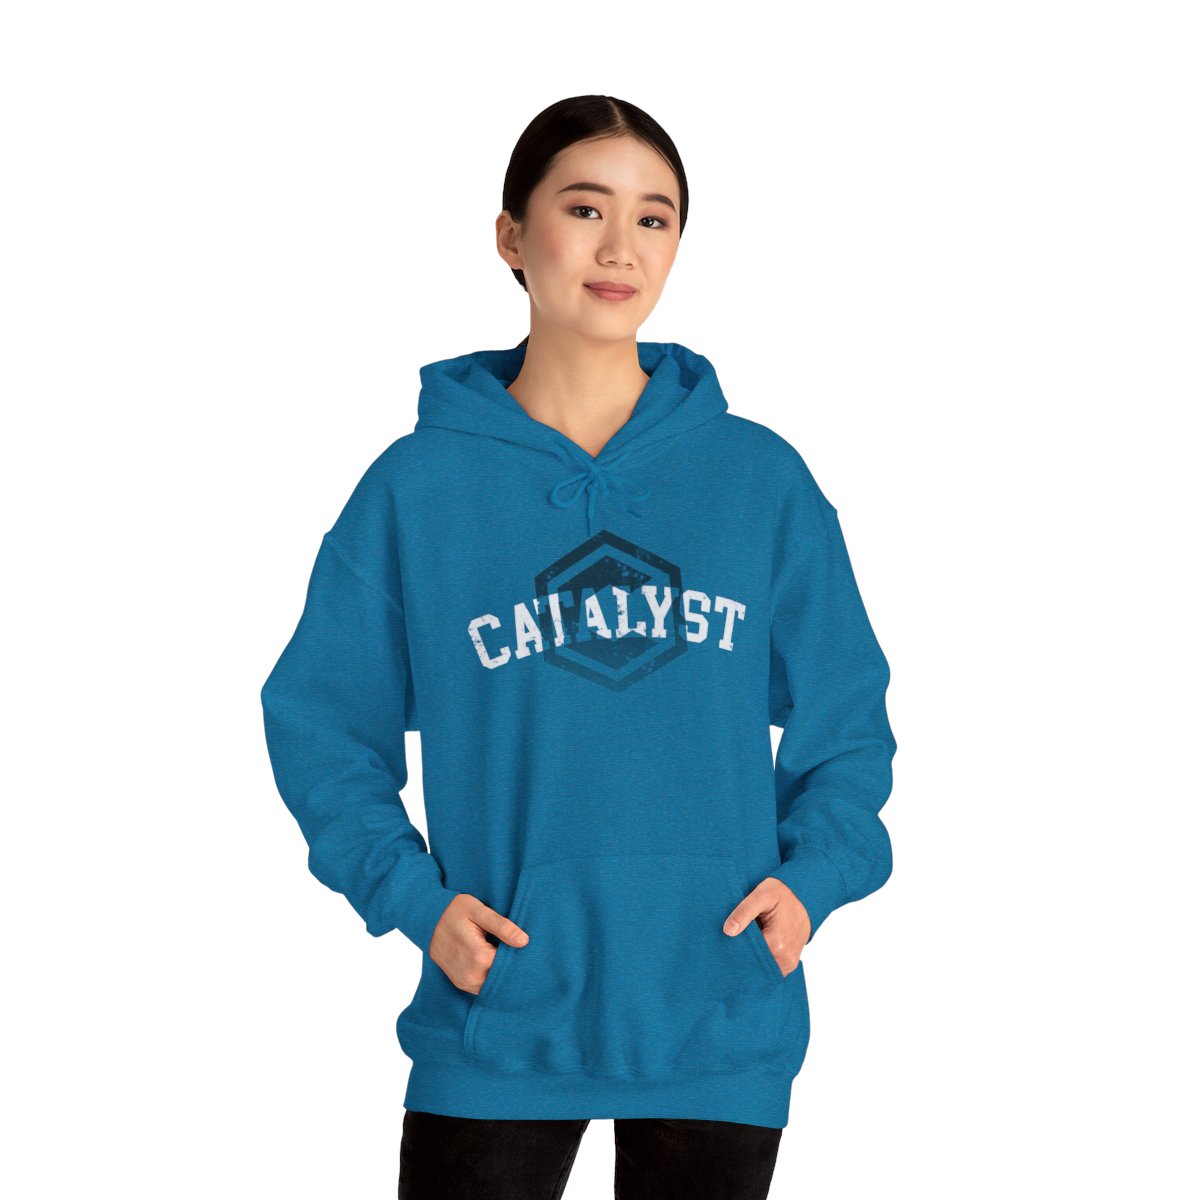 Catalyst "Athletic Logo" Hoodie product thumbnail image